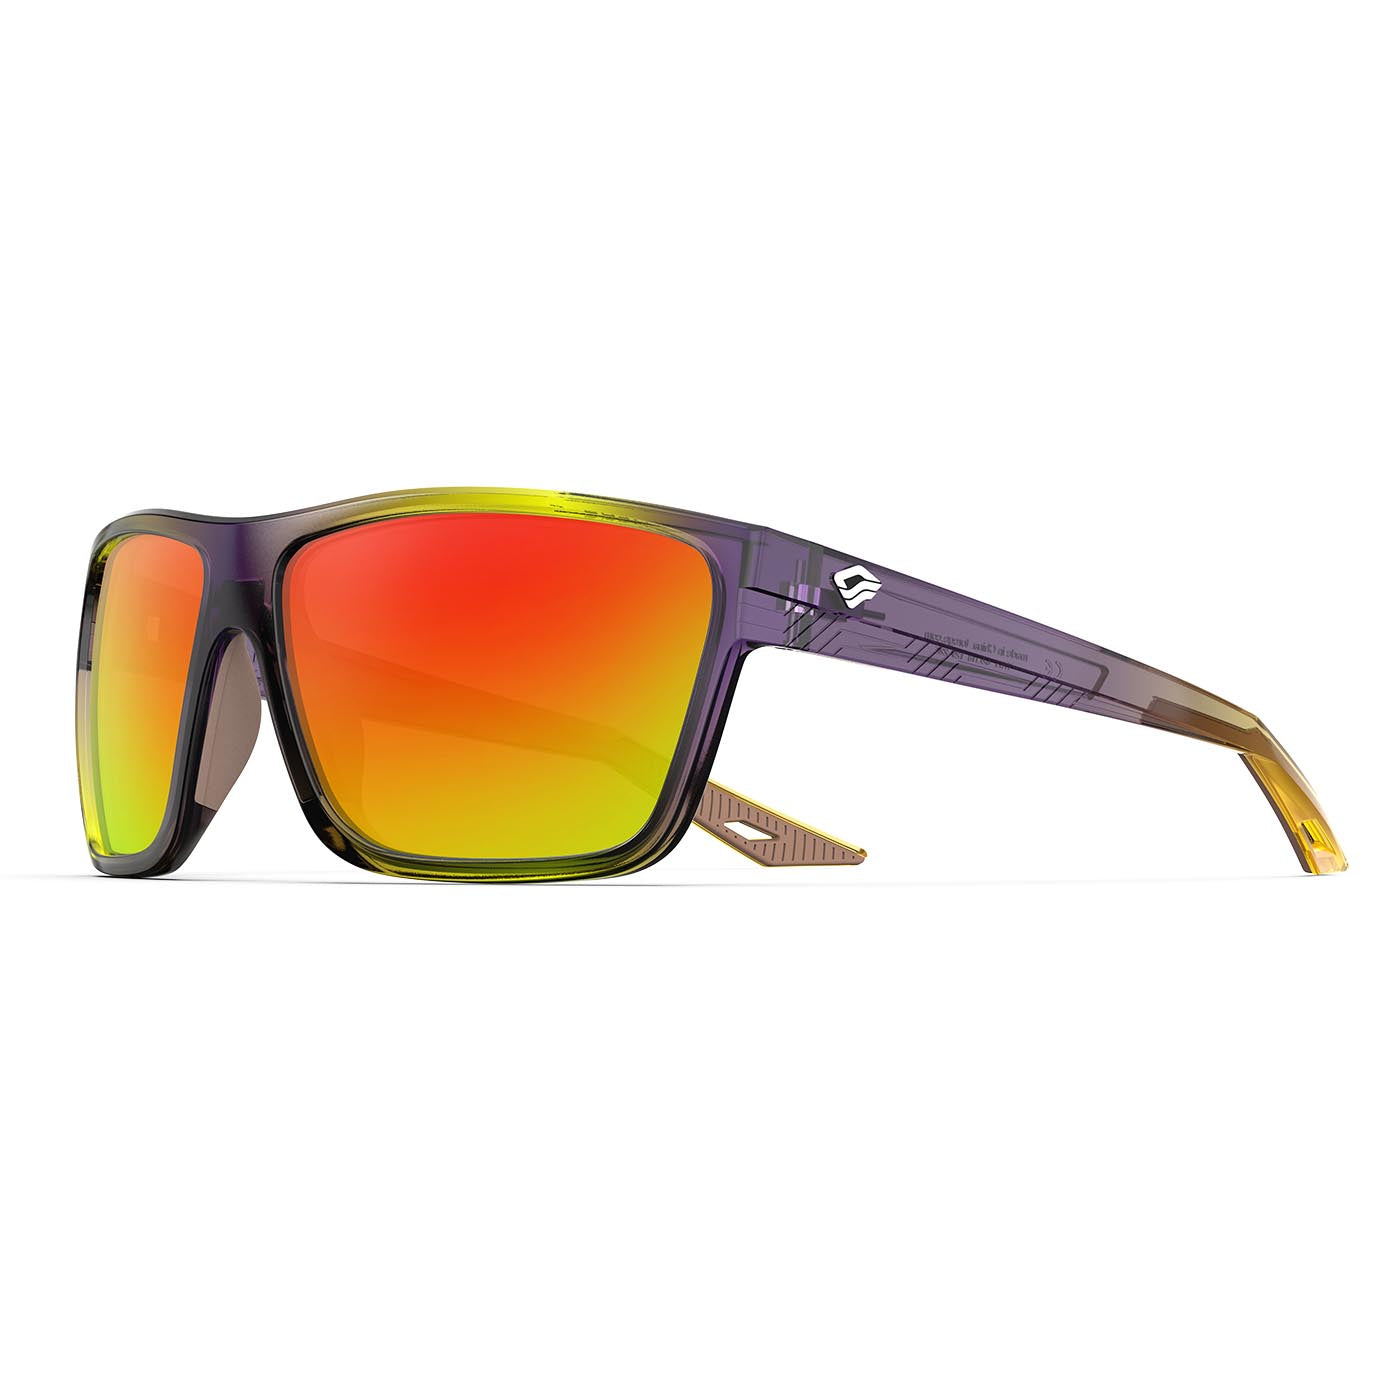 Coral Radiance Polarized Sunglasses for Men and Women - Ideal for Driving Fishing Cycling and Running,UV Protection - Purple Frame & Orange Lens